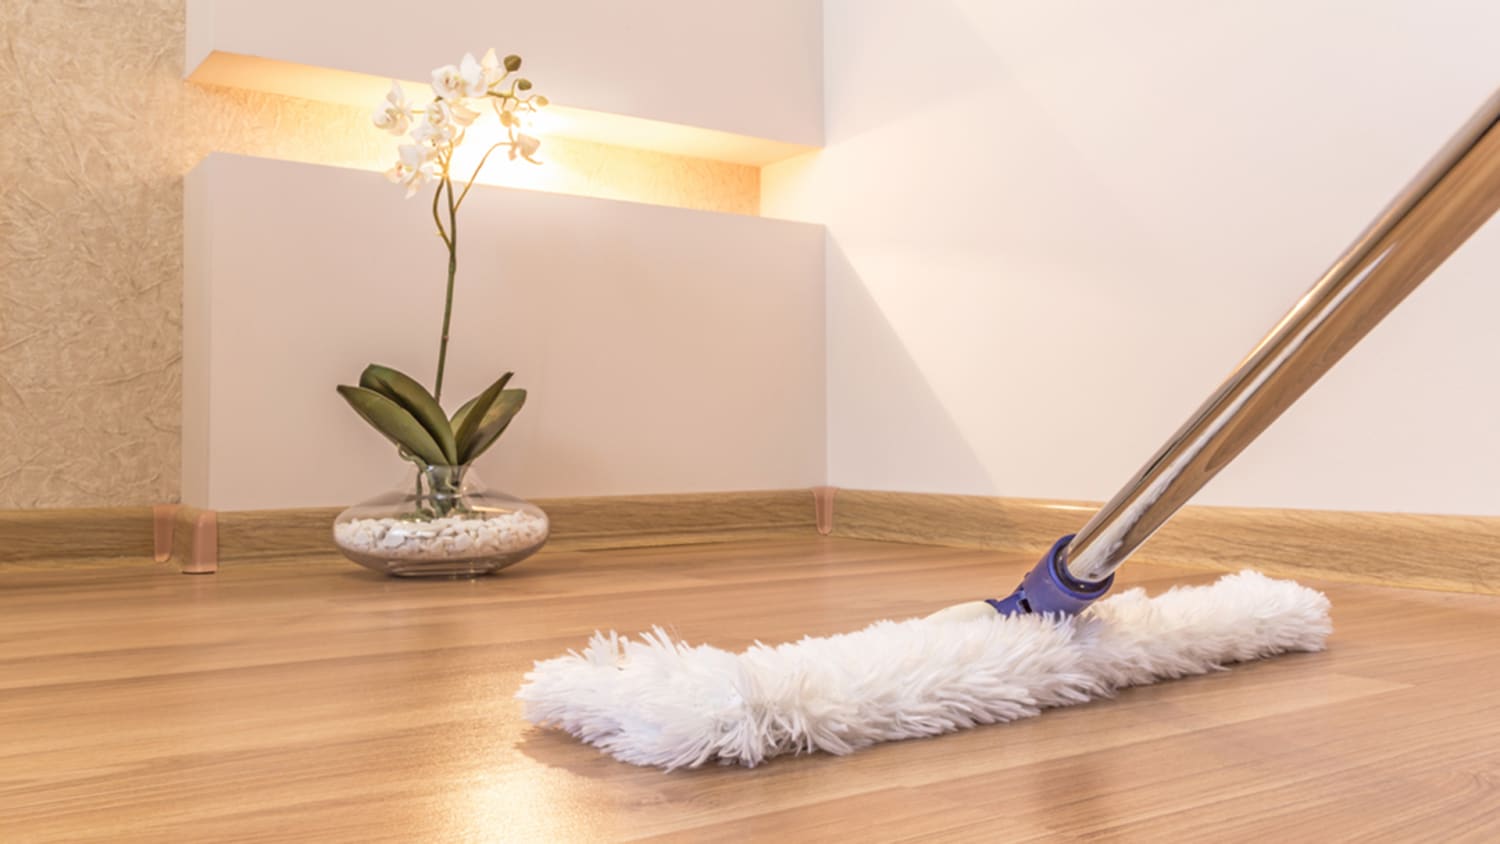 How To Clean Hardwood Floors The Right Way, Best Way To Keep Hardwood Floors Clean With Pets